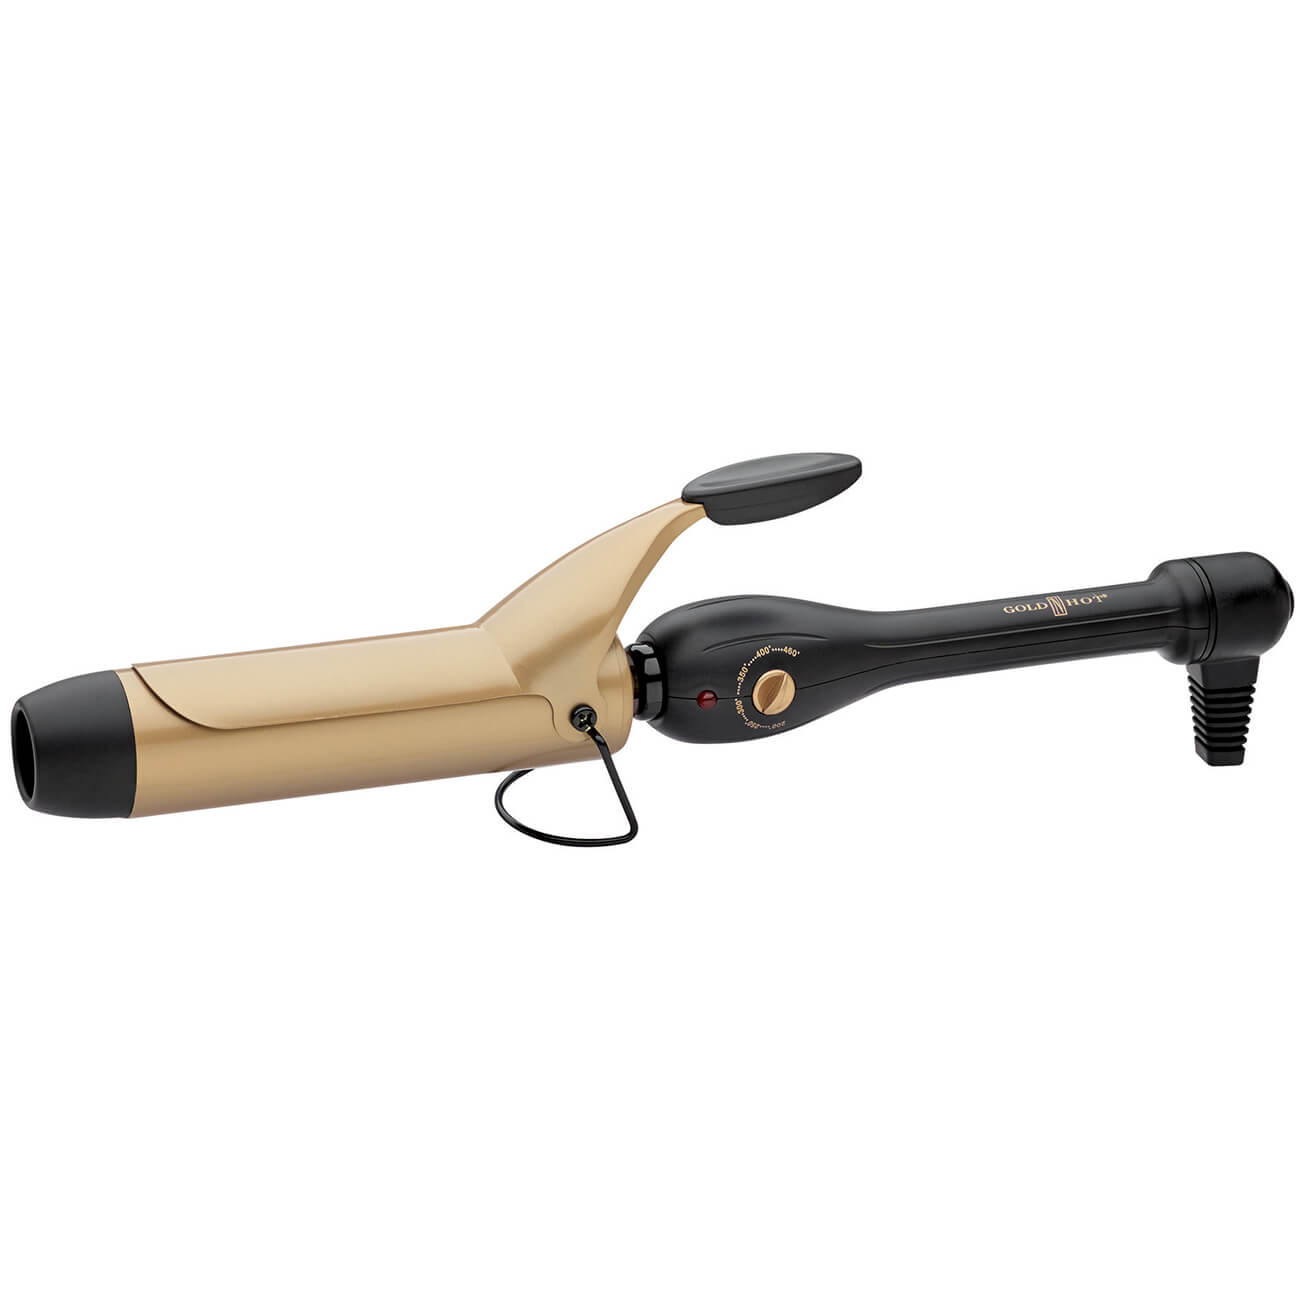 Gold 'N Hot GH9207 Professional Spring Curling Iron